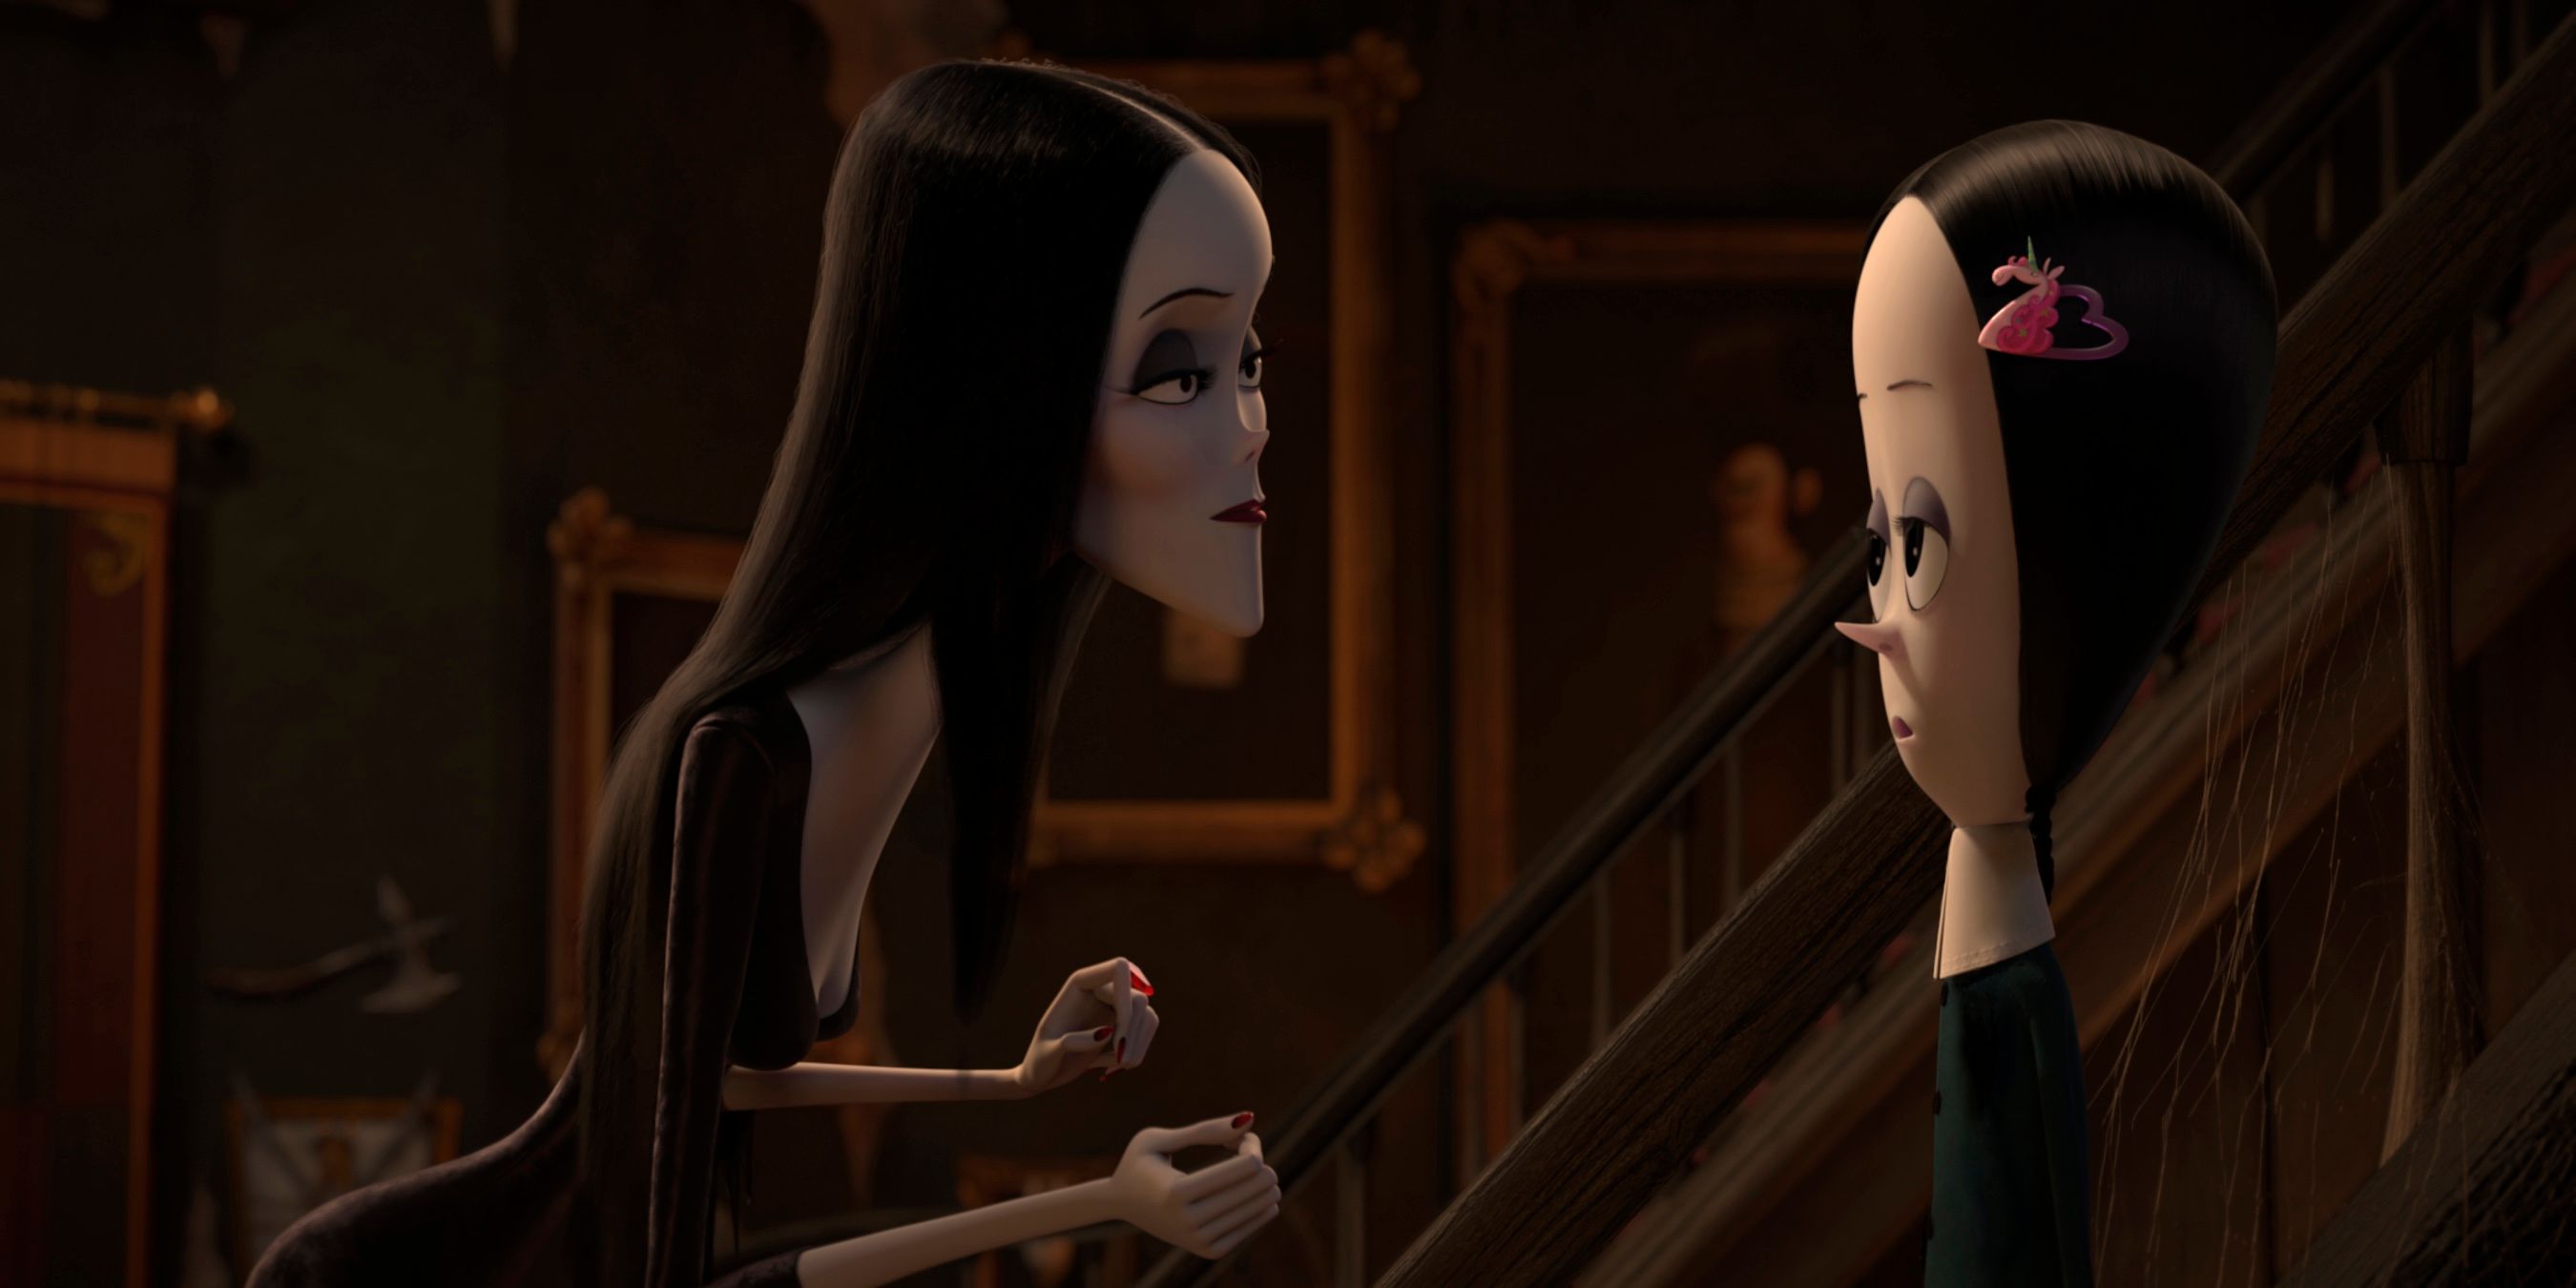 Addams Family 5 Things The Animated Movie Got Right (And 5 It Got Wrong)